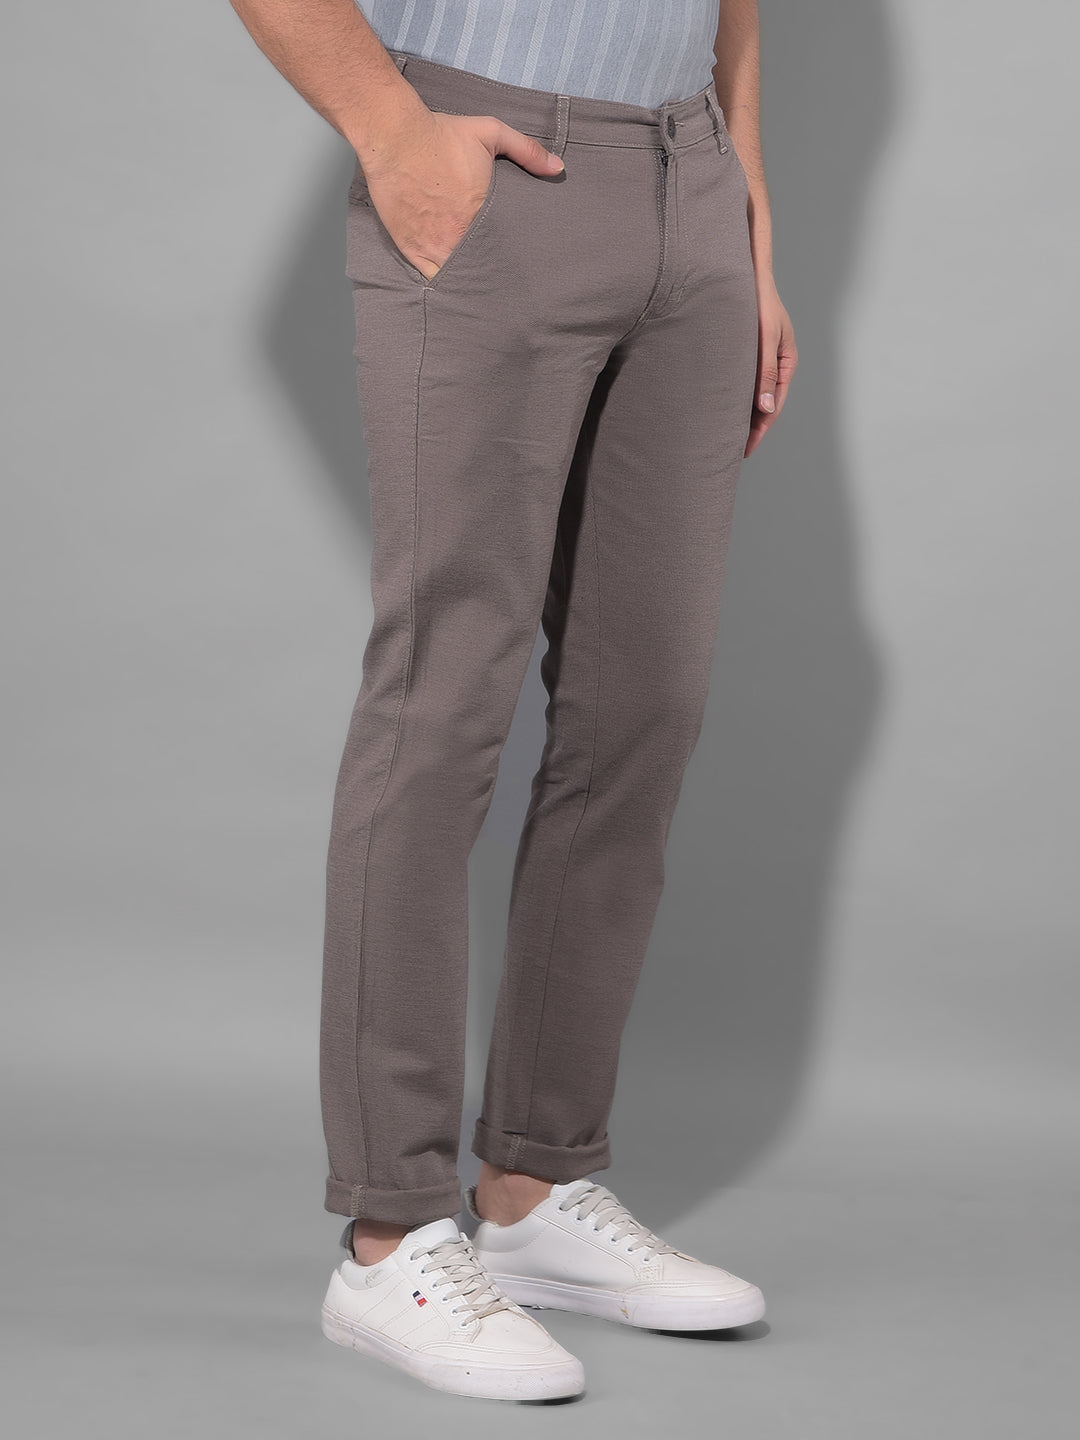 cobb brown ultra fit casual trouser